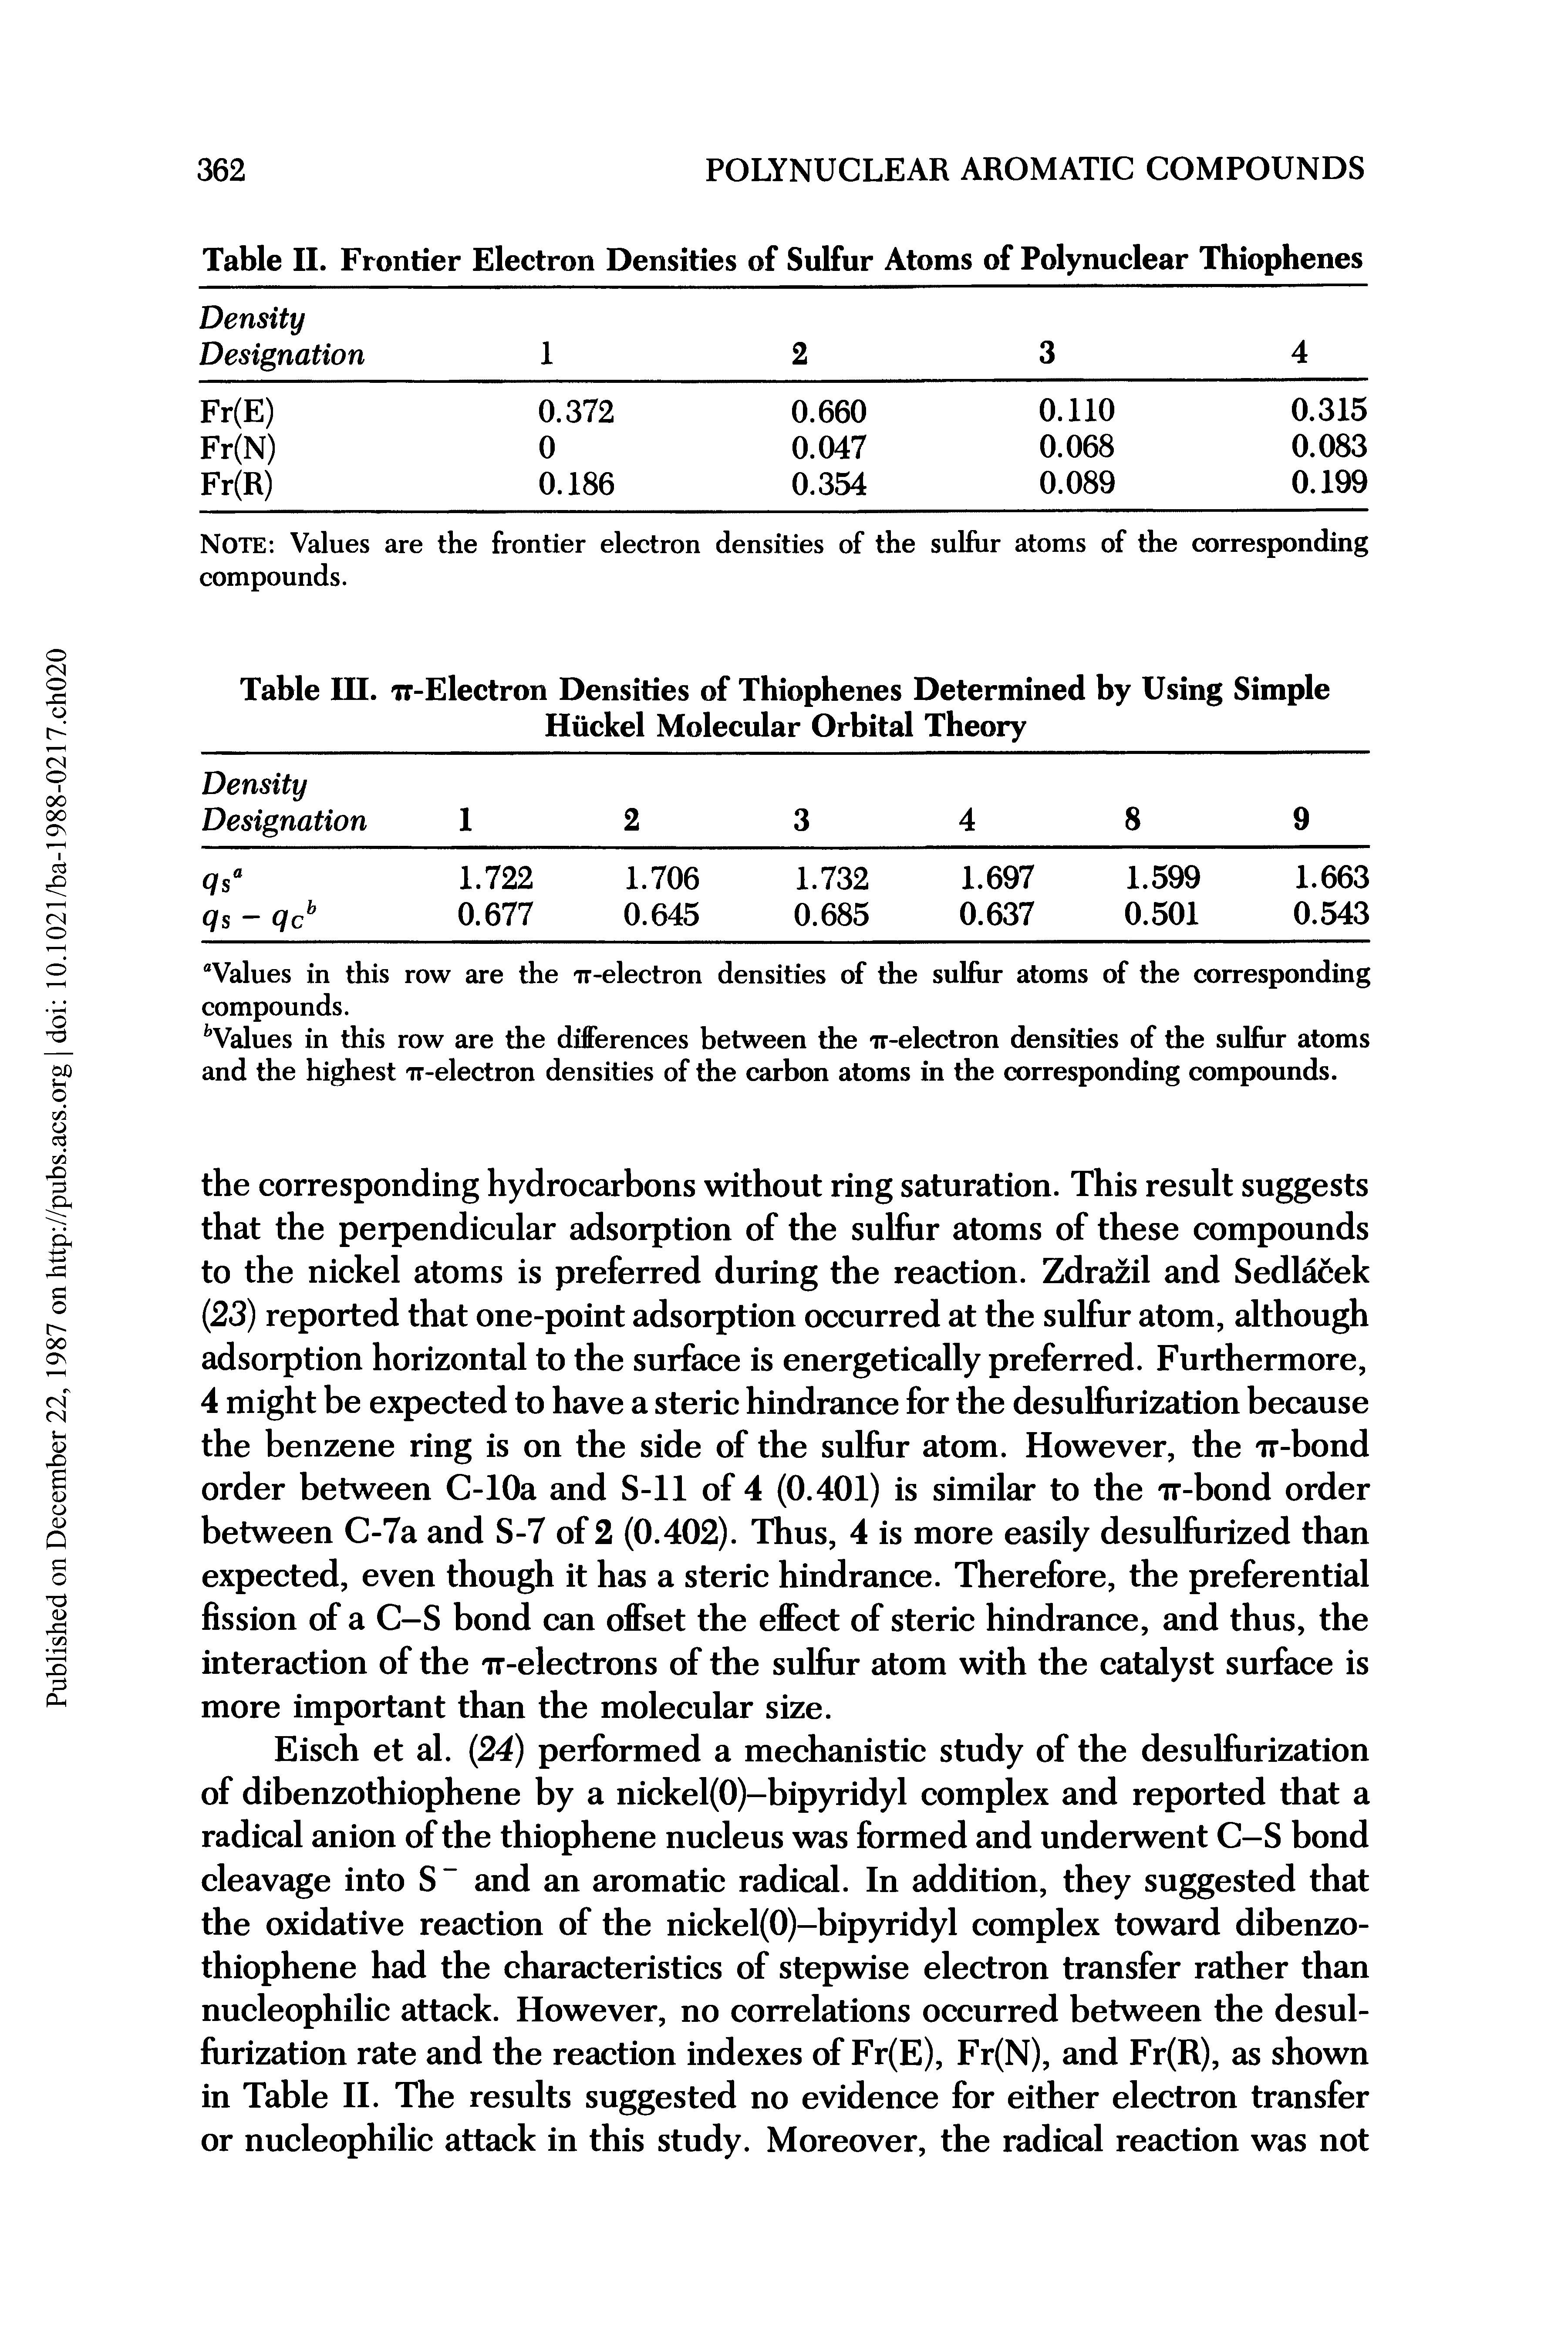 Table II. Frontier Electron Densities of Sulfur Atoms of Polynuclear Thiophenes...